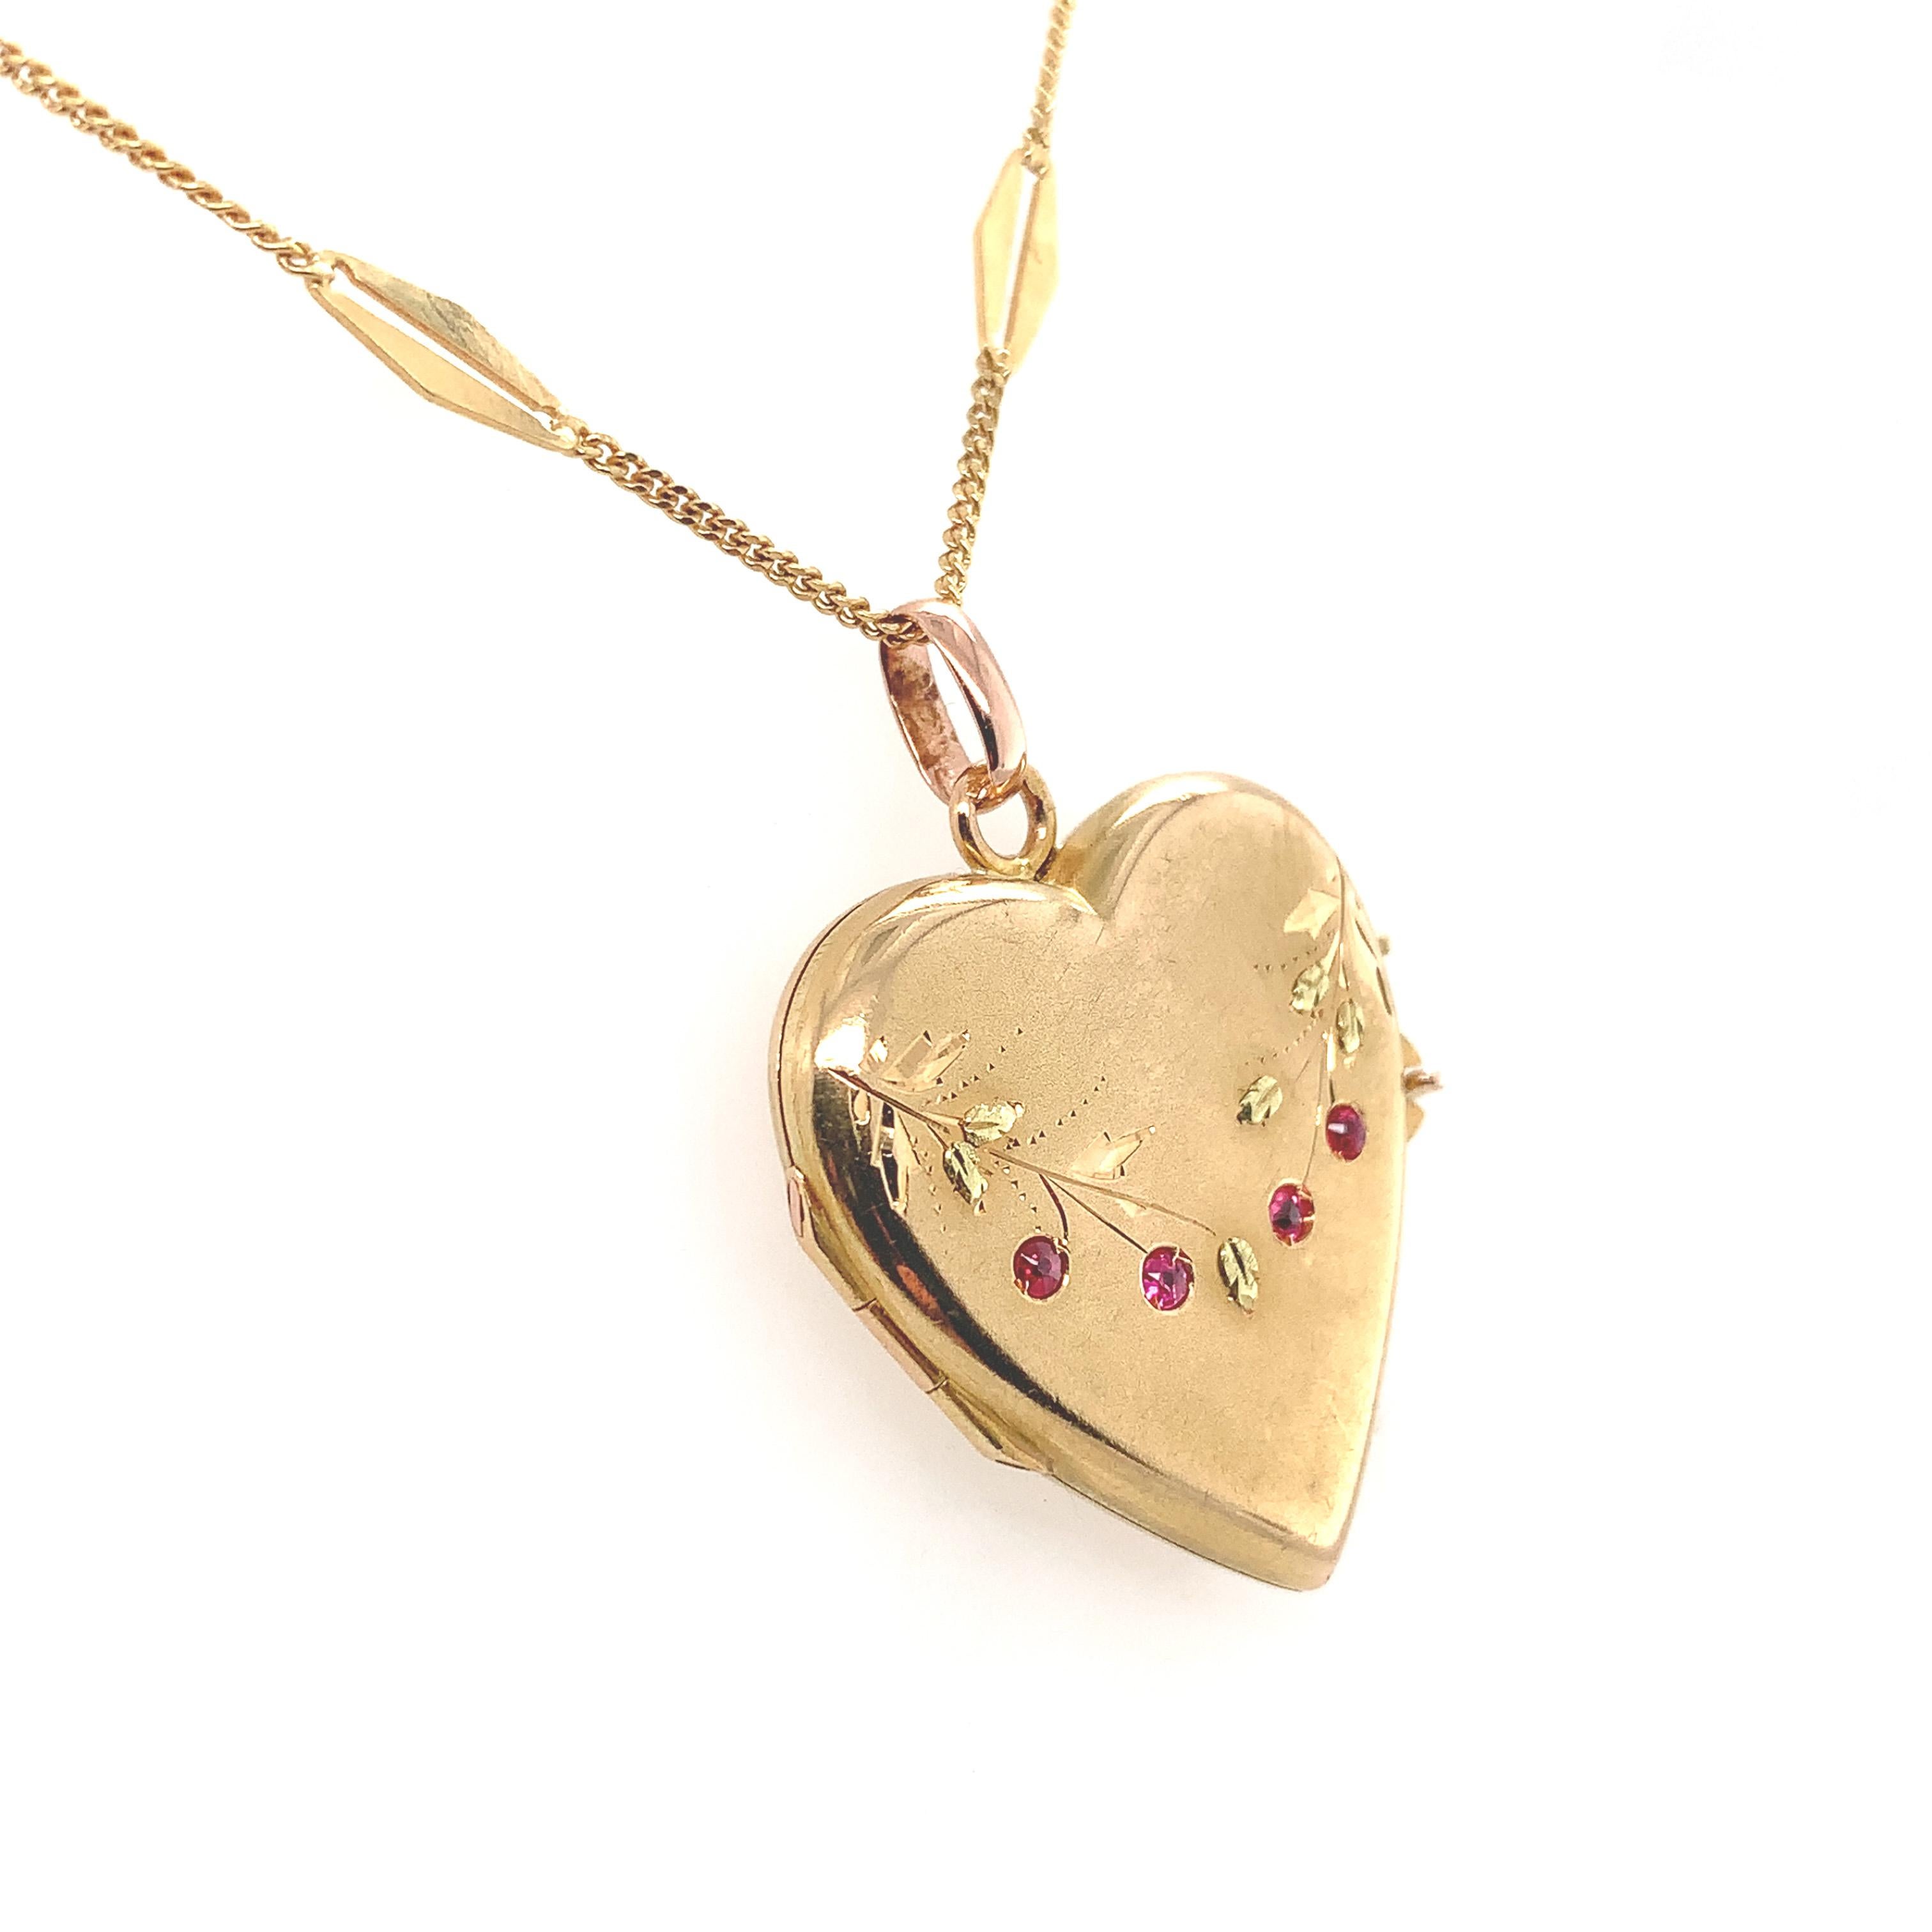 18K yellow gold heart shaped locket with applied green gold leaves and 4 small synthetic ruby accents. There is a French eagle hallmark on the loop attached to the heart. The heart also has engraved leaves and branches. The synthetic rubies each